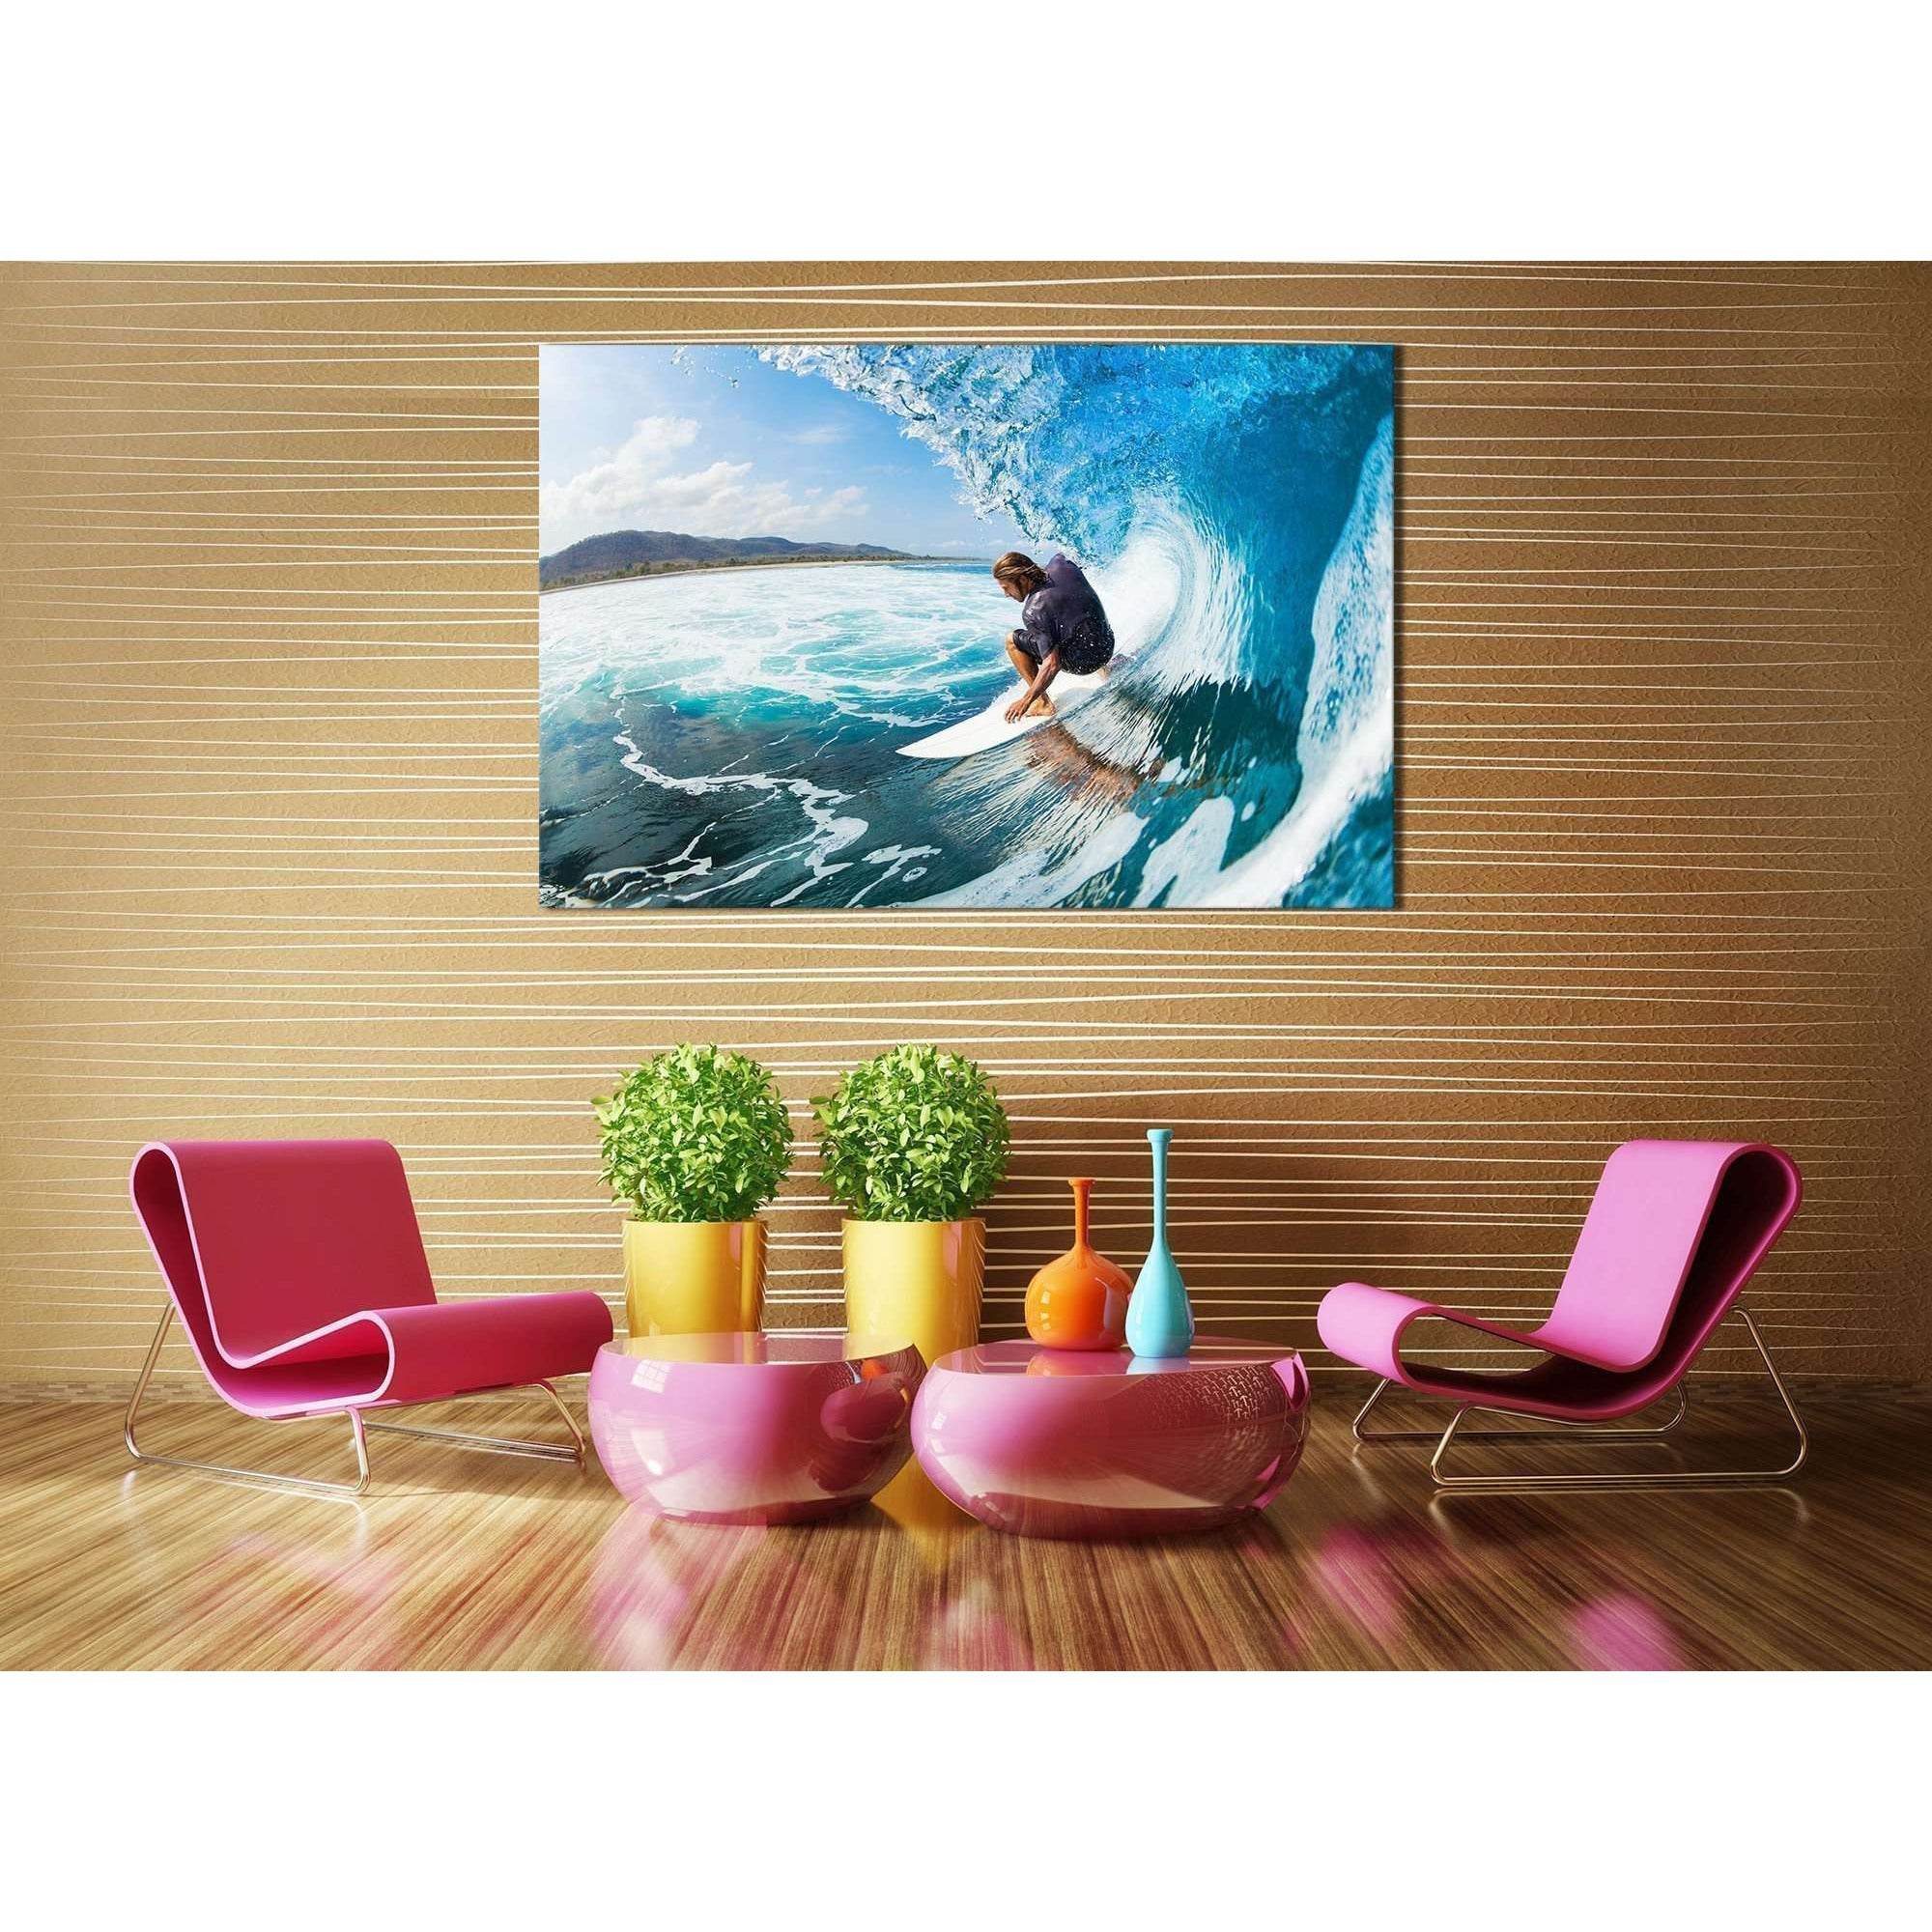 Surfing №655 Ready to Hang Canvas Print